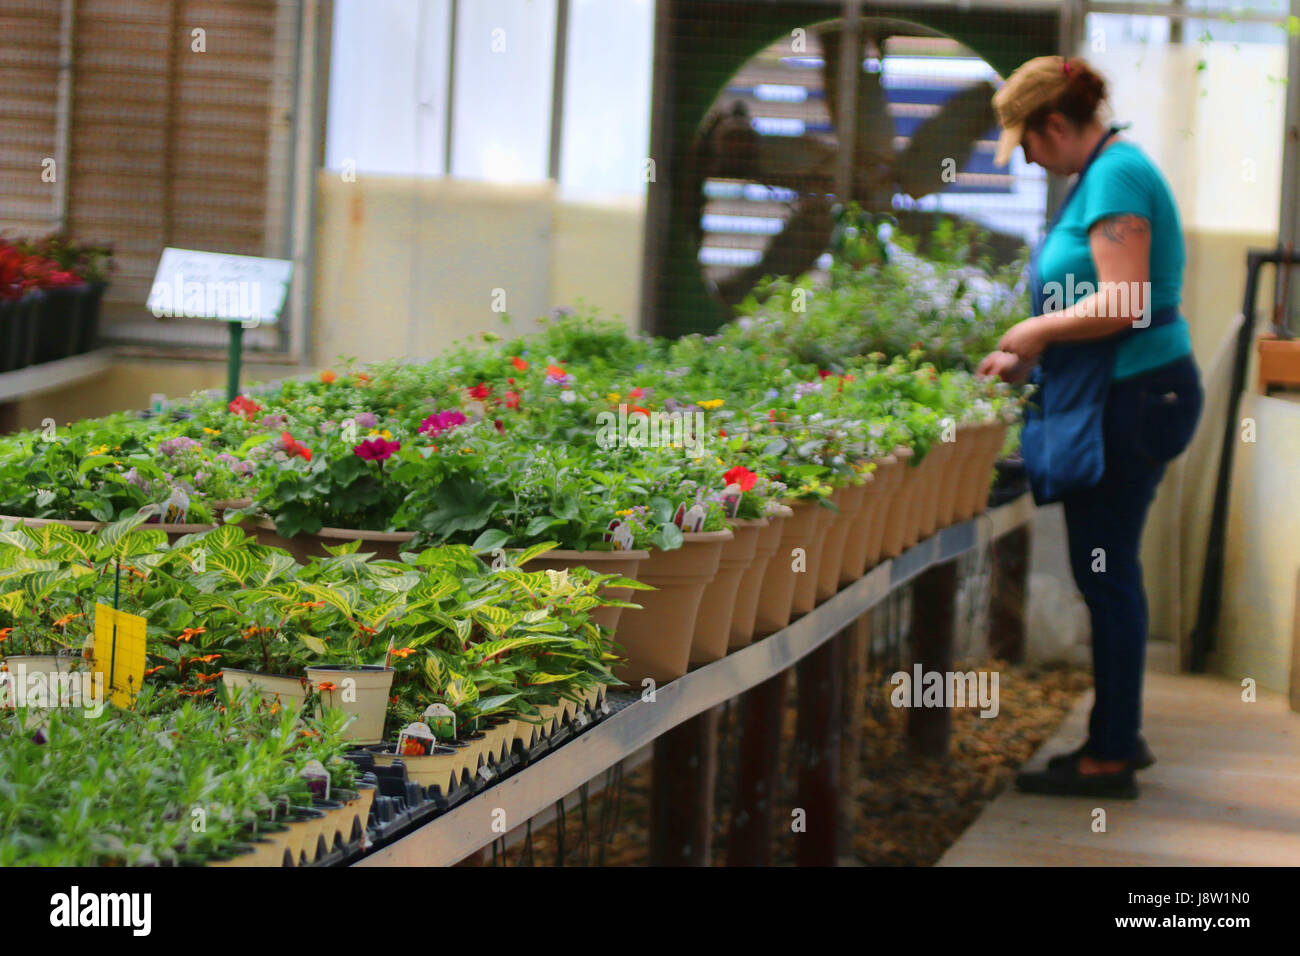 A nursery greenhouse worker working on the plants Stock Photo